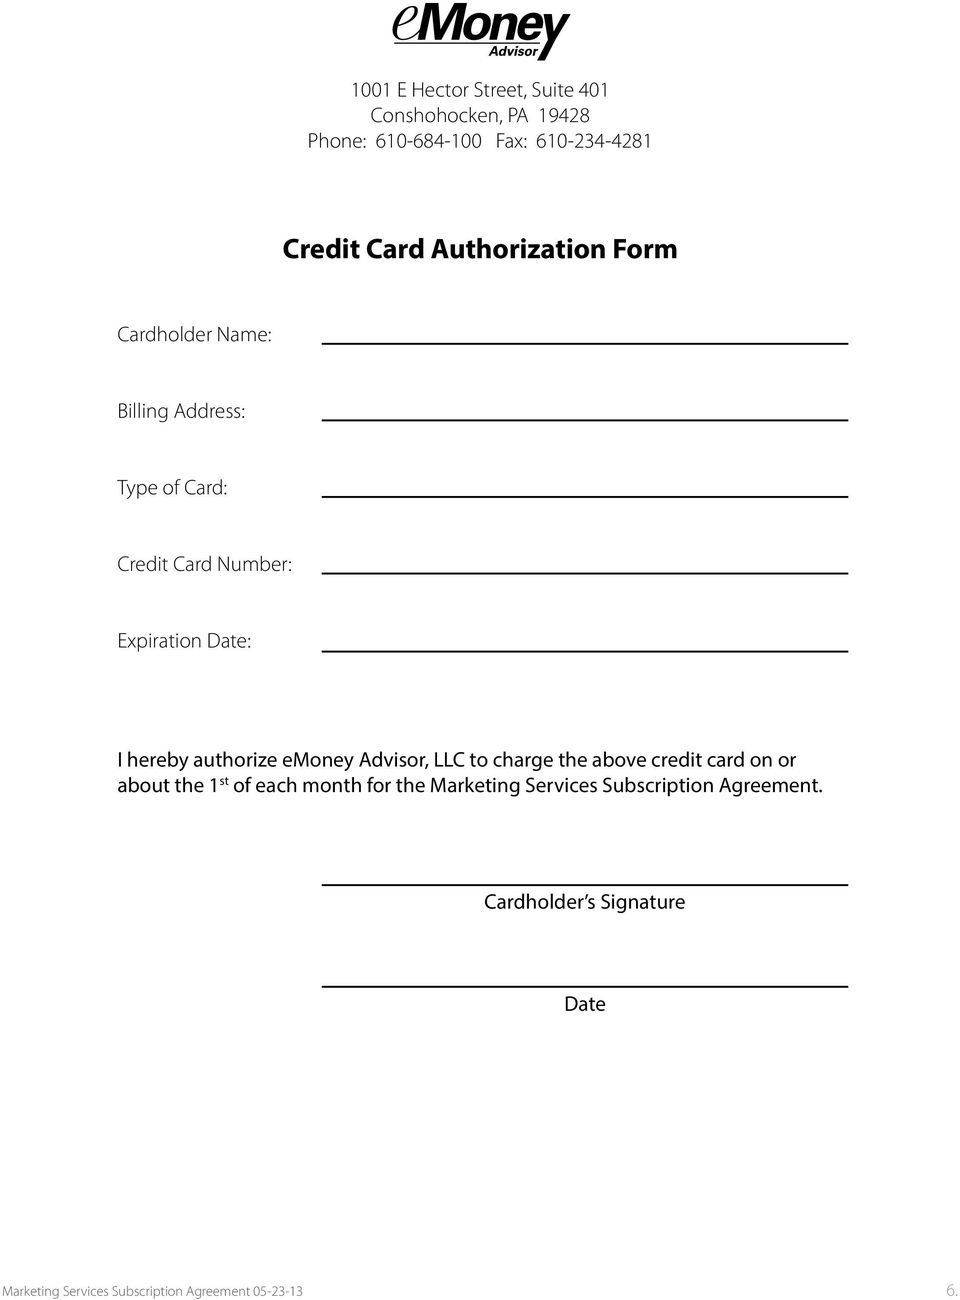 hereby authorize emoney Advisor, LLC to charge the above credit card on or about the 1 st of each month for the